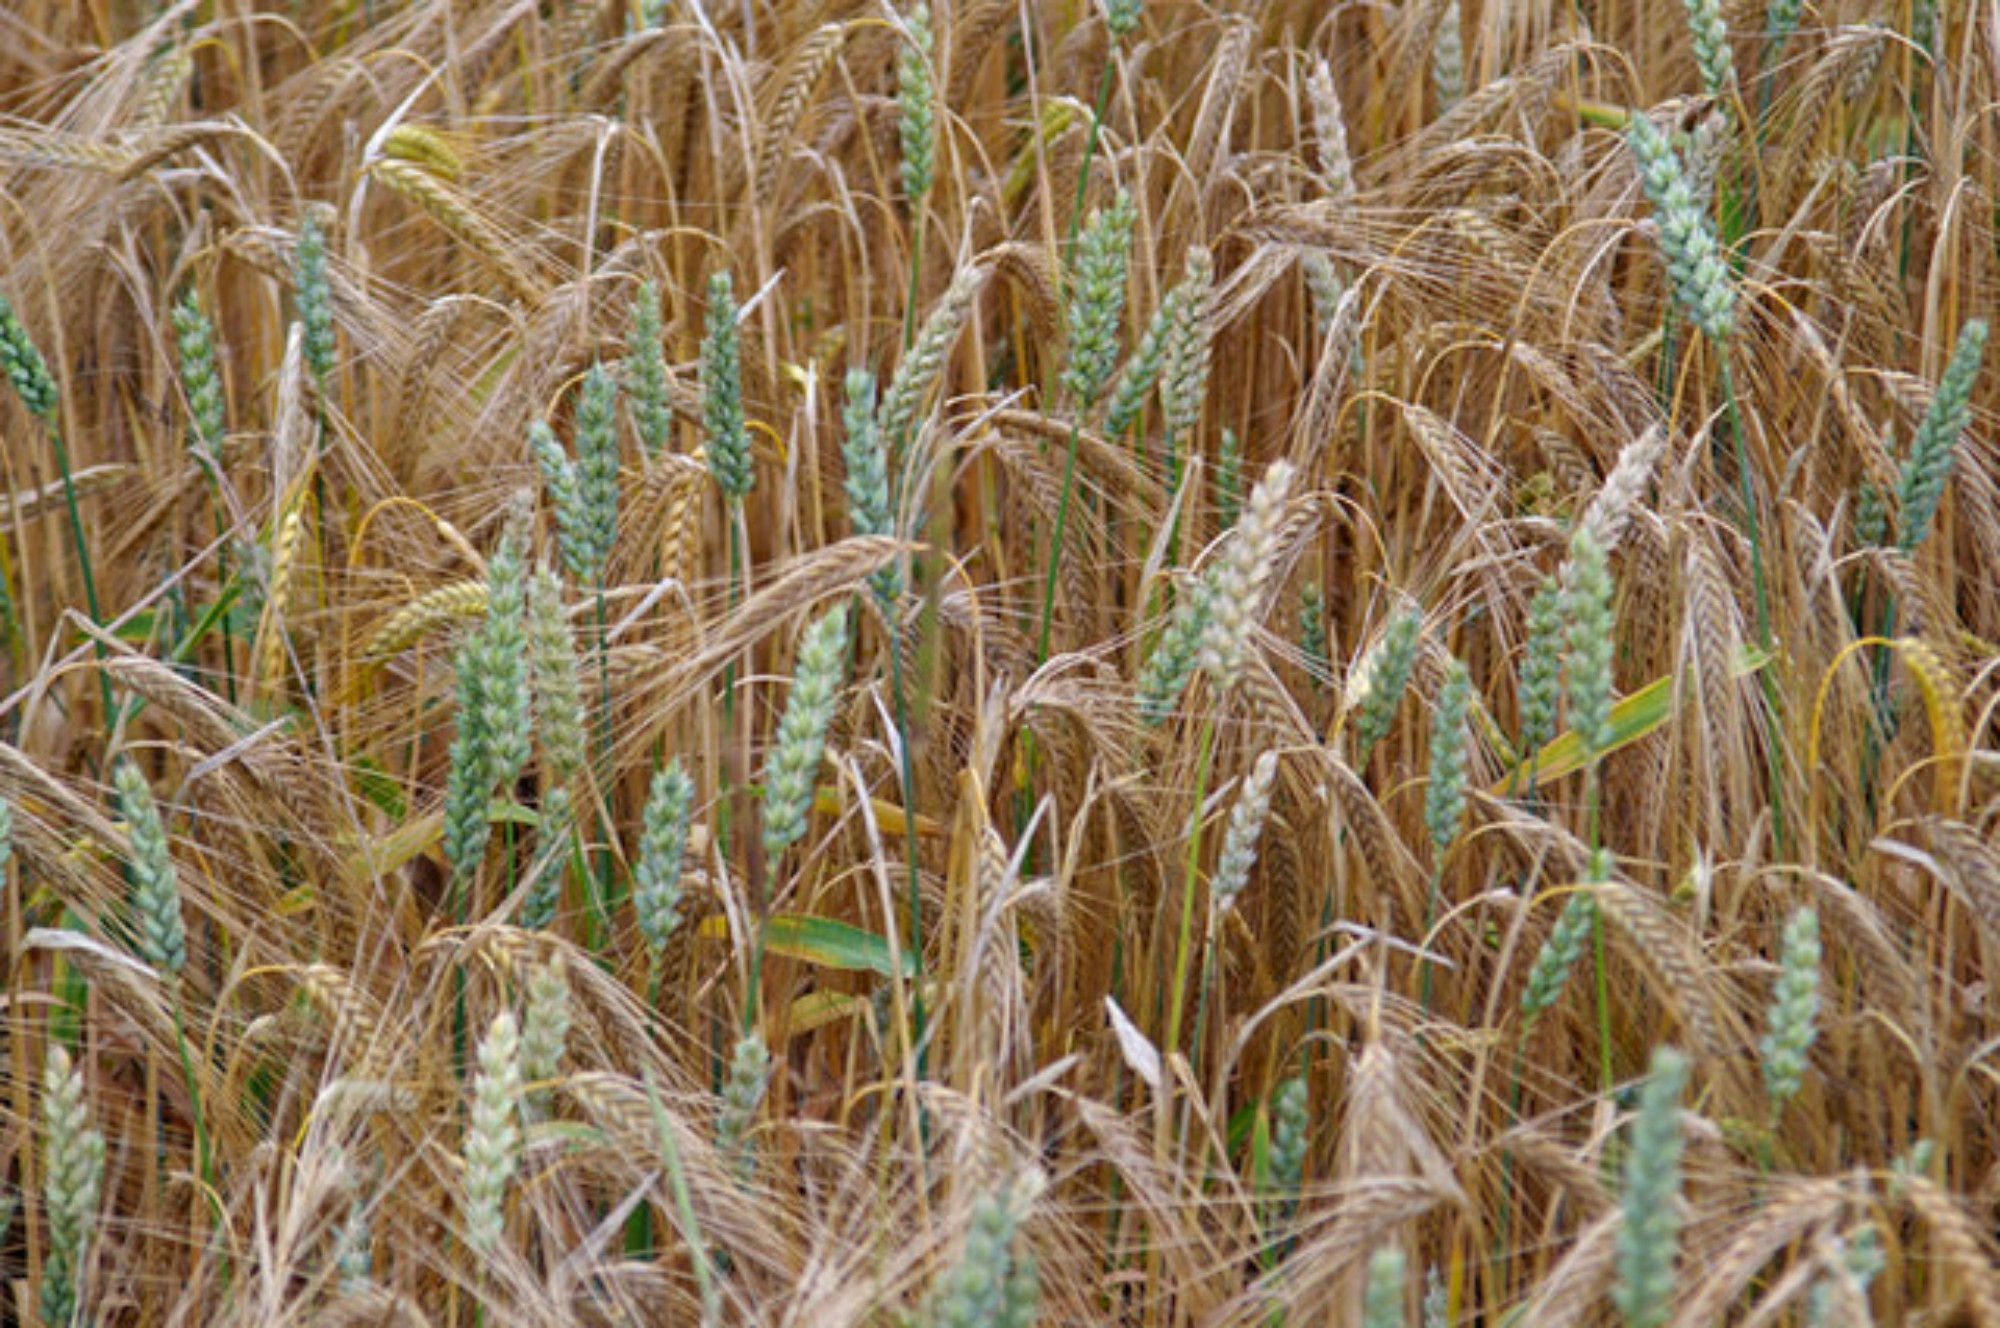 Field with barley and wheat growing together